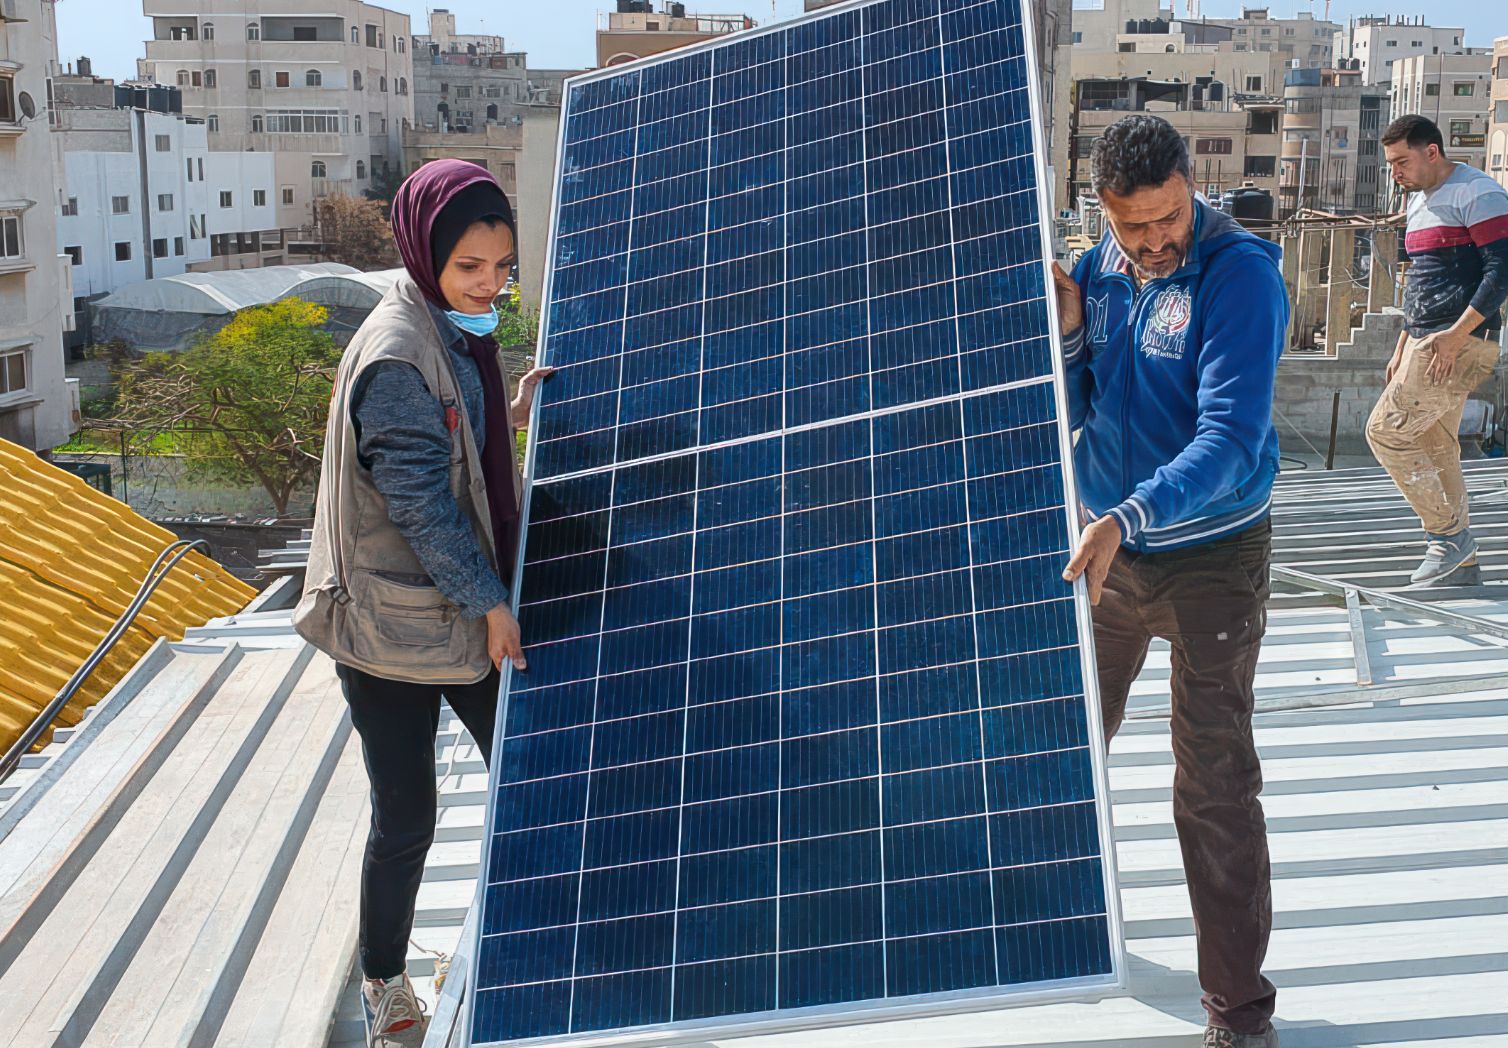 A woman with a headscarf and a man are on the roof of a house, carrying a large solar panel together.